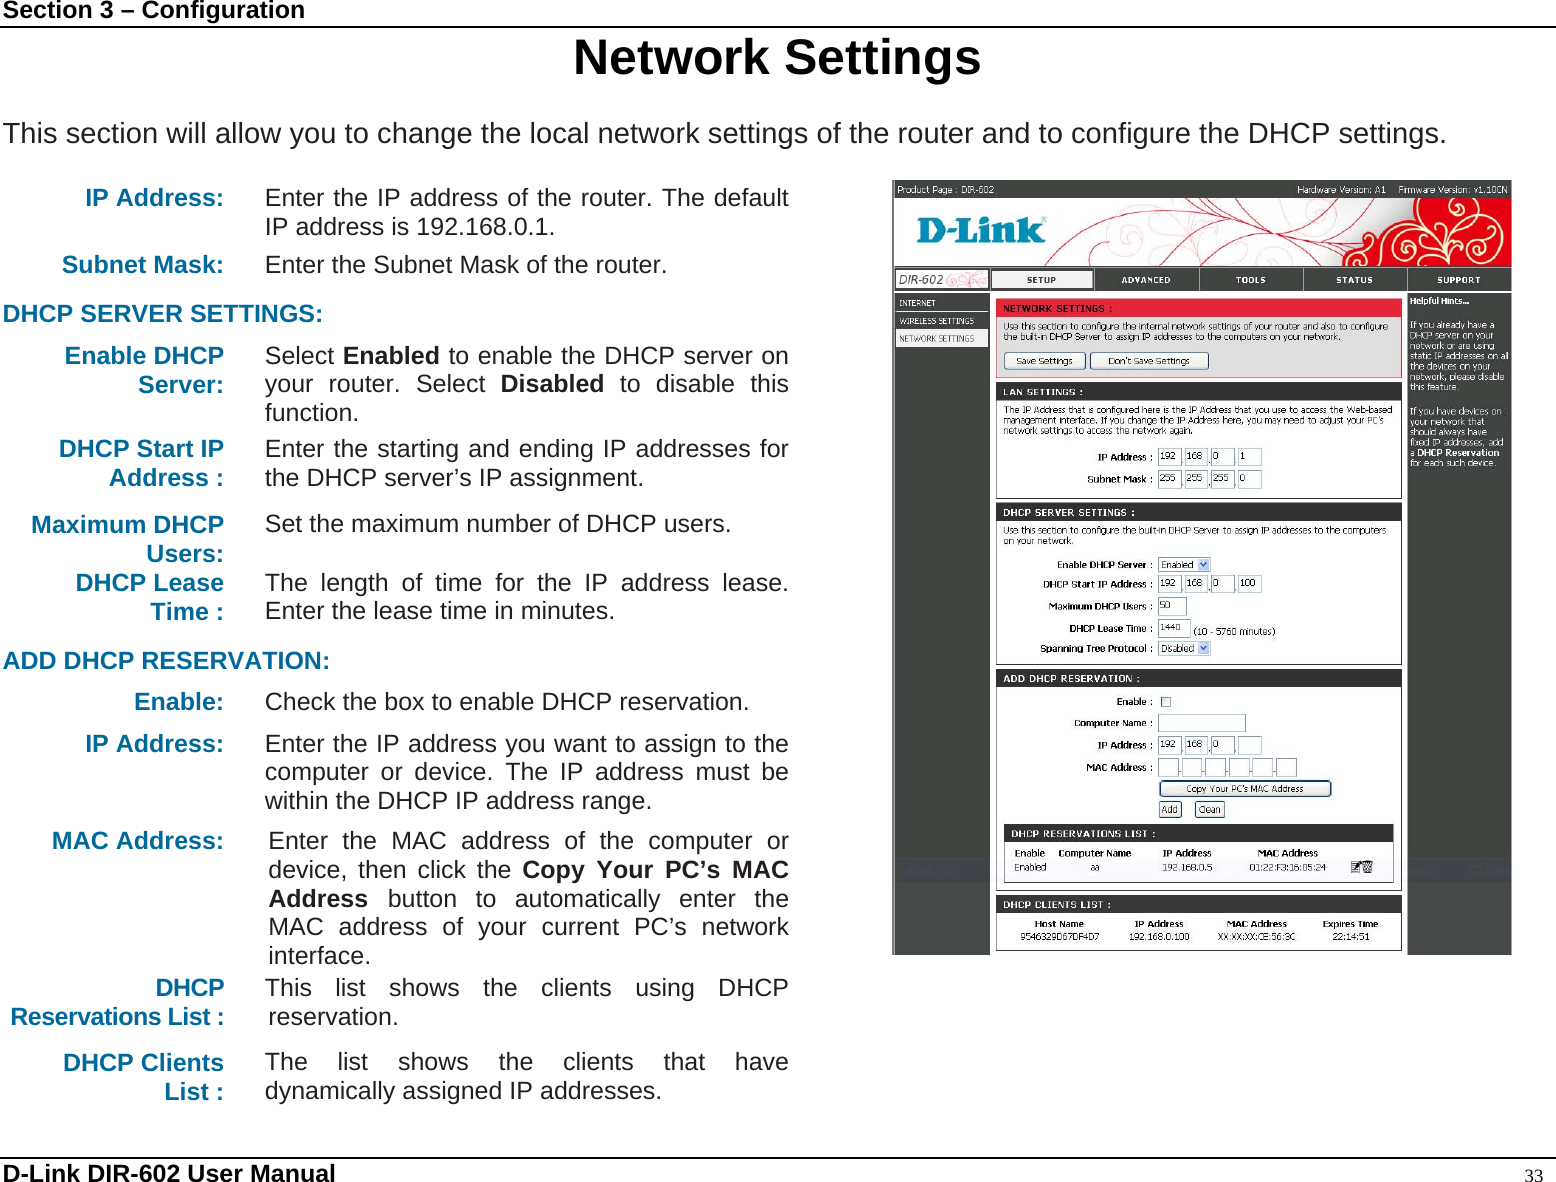 Section 3 – Configuration  Network Settings  This section will allow you to change the local network settings of the router and to configure the DHCP settings.  IP Address:  Enter the IP address of the router. The default IP address is 192.168.0.1. Subnet Mask: Enter the Subnet Mask of the router.    DHCP SERVER SETTINGS: Enable DHCP Server: Select Enabled to enable the DHCP server on your router. Select Disabled to disable this function. DHCP Start IP Address :  Enter the starting and ending IP addresses for the DHCP server’s IP assignment. Maximum DHCP Users:  Set the maximum number of DHCP users. DHCP Lease Time :  The length of time for the IP address lease. Enter the lease time in minutes.  ADD DHCP RESERVATION: Enable:  Check the box to enable DHCP reservation. IP Address:  Enter the IP address you want to assign to the computer or device. The IP address must be within the DHCP IP address range. MAC Address:  Enter the MAC address of the computer or device, then click the Copy Your PC’s MAC Address  button to automatically enter the MAC address of your current PC’s network interface.  DHCP  Reservations List :  This list shows the clients using DHCP reservation.  DHCP Clients List :  The list shows the clients that have dynamically assigned IP addresses.  D-Link DIR-602 User Manual                                                                                               33 